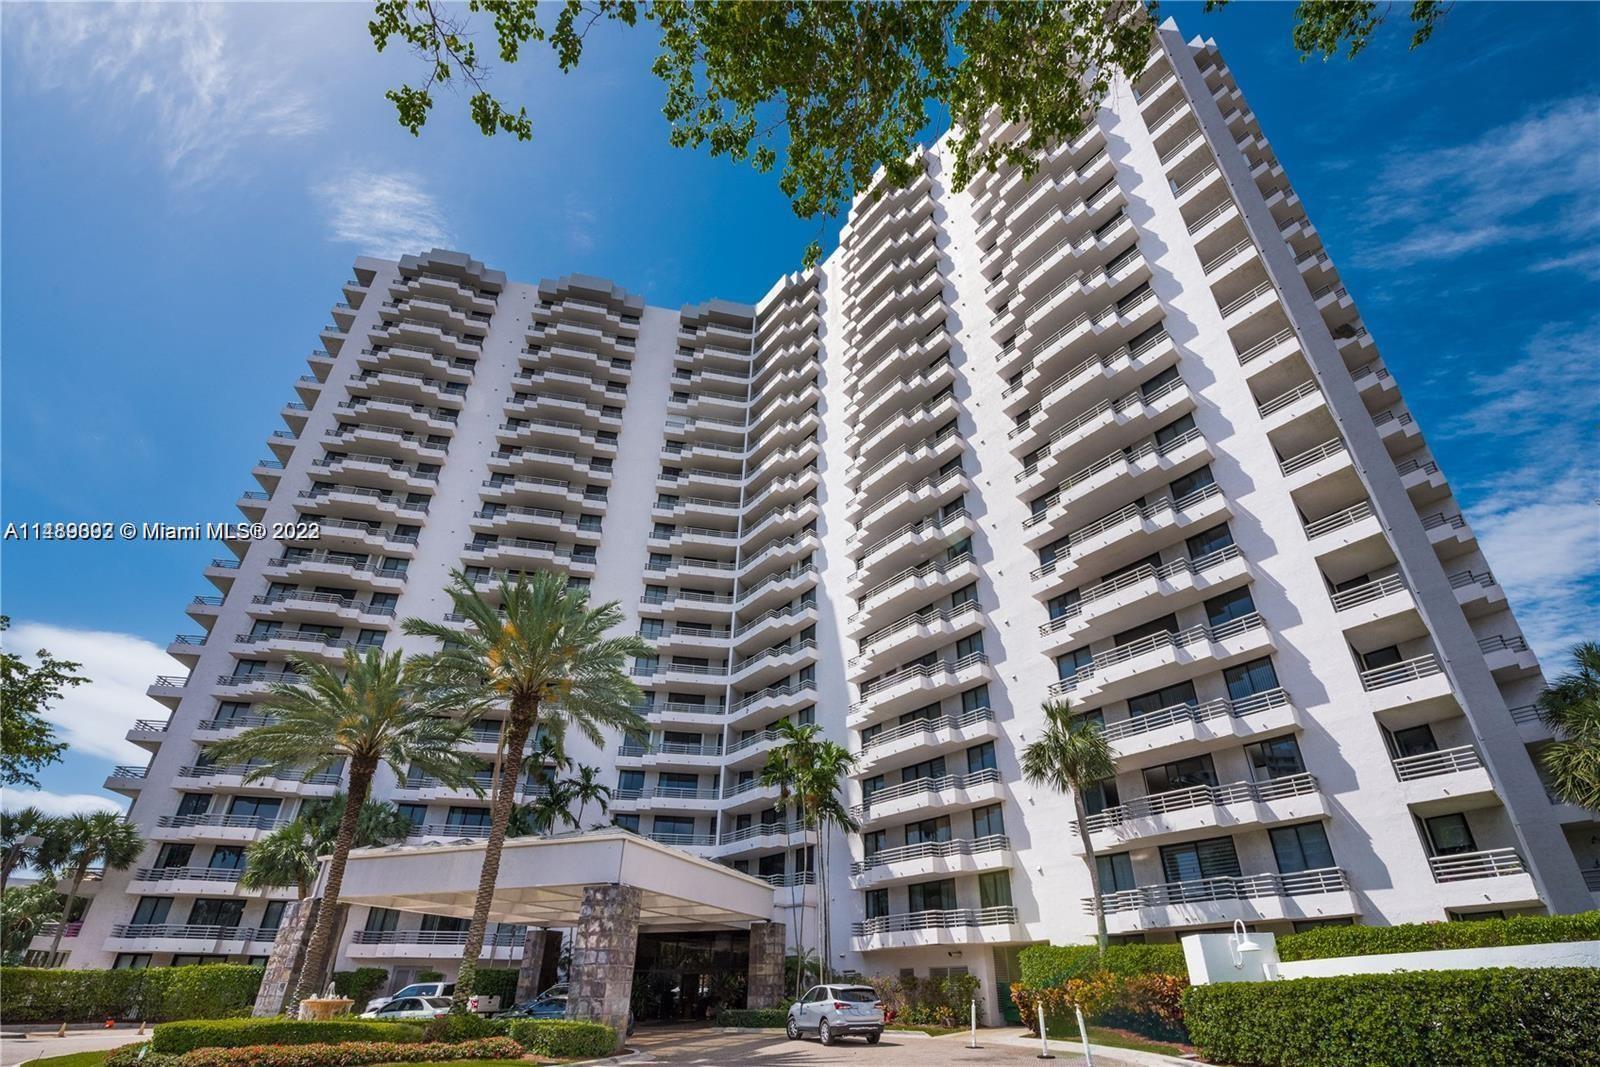 AMAIZING APARTMENT IN THE PARC CENTRAL IN AVENTURA! WITH 1 BEDROOM AND 2 BATHROOMS. This unit with gorgeous views of the Turnberry Golf Course, the Aventura Mall, and more. The location of the Parc Central is very convenient with easy access to Biscayne Boulevard and I-95. It  is also steps away from some of the finest shopping and restaurants in Aventura.